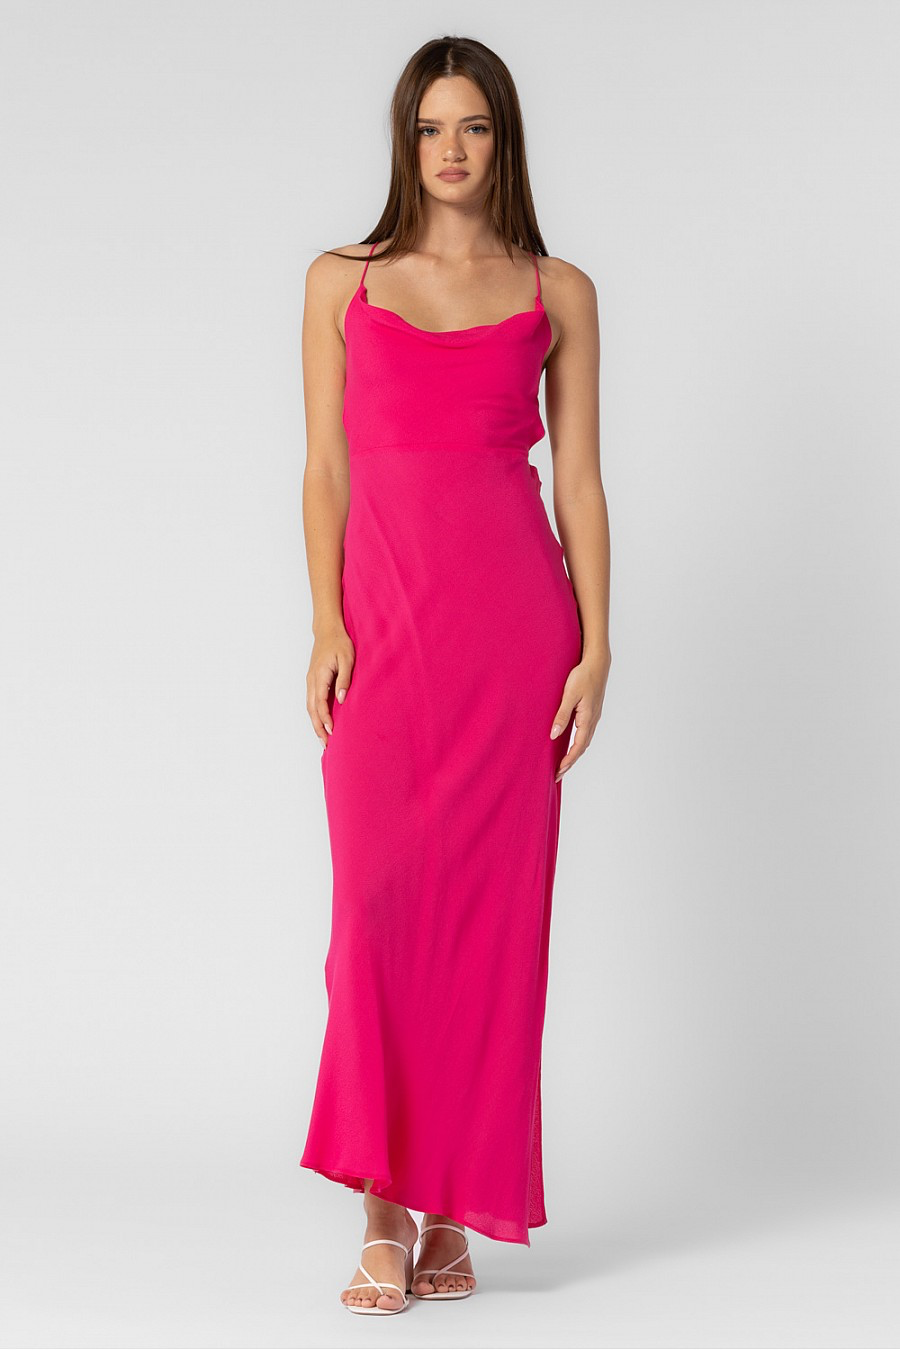 Maxi dress in the color pink with an open low back.